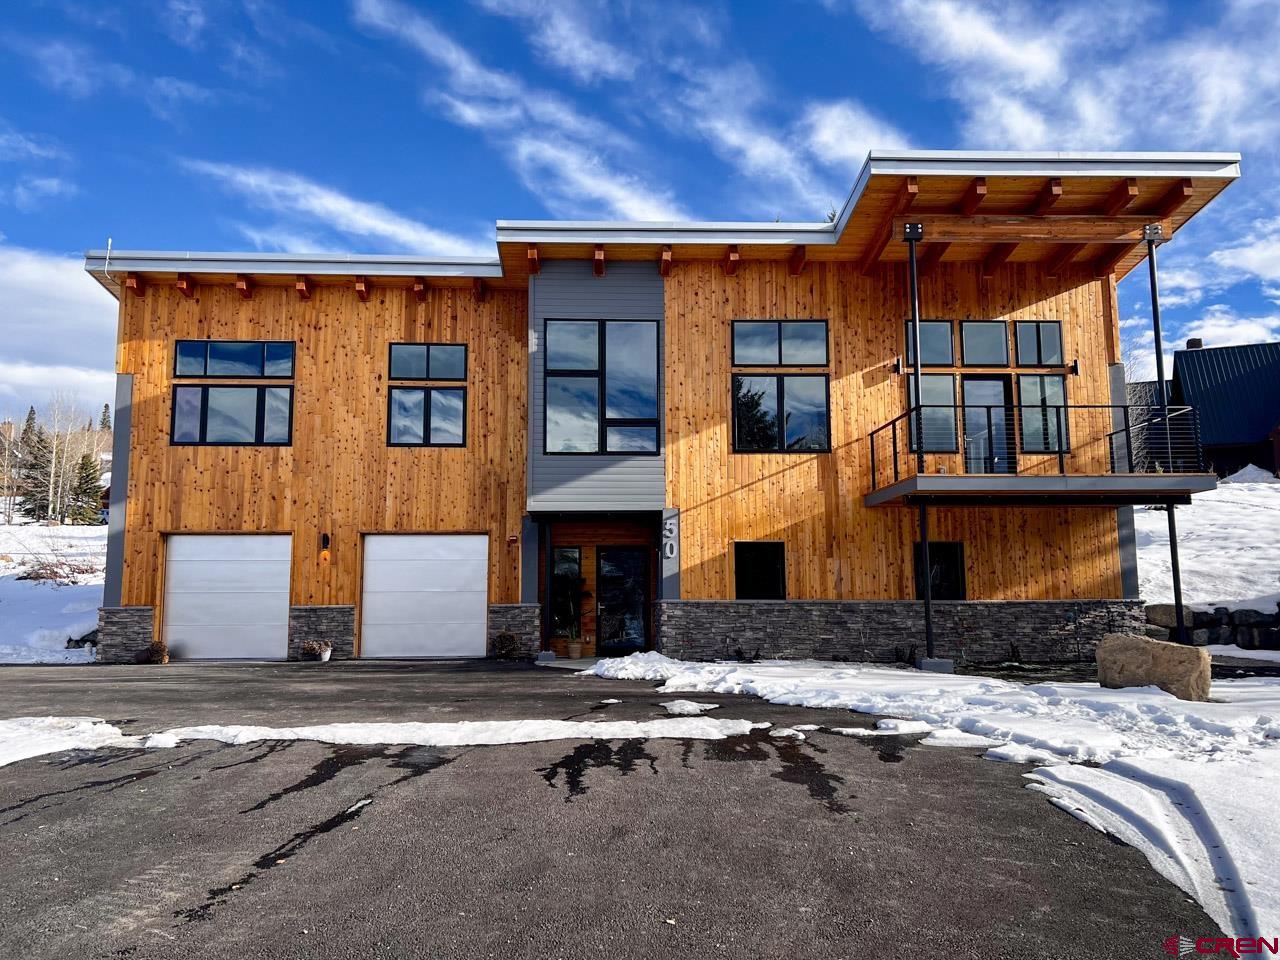 50 Anthracite Drive, Mt. Crested Butte, CO 